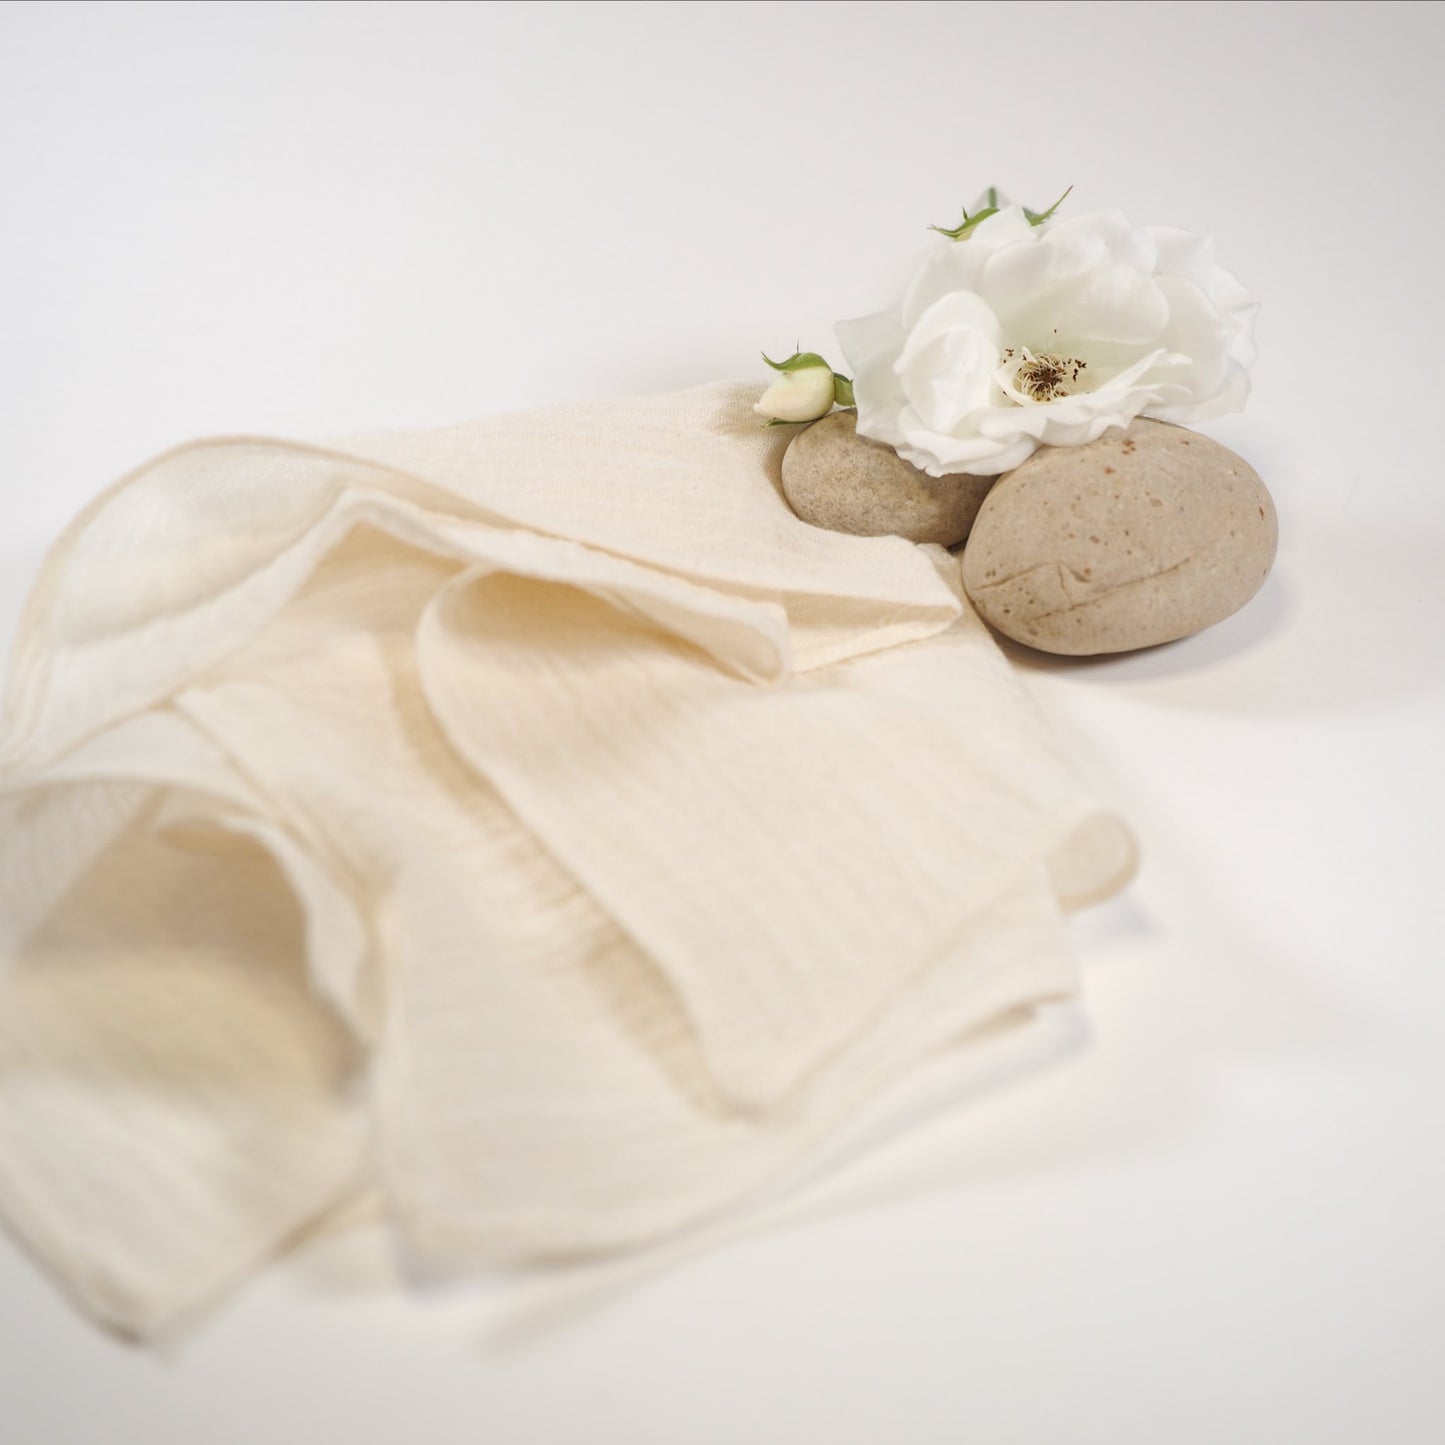 Handmade organic cotton muslin facecloth softly folded with rose and rock.